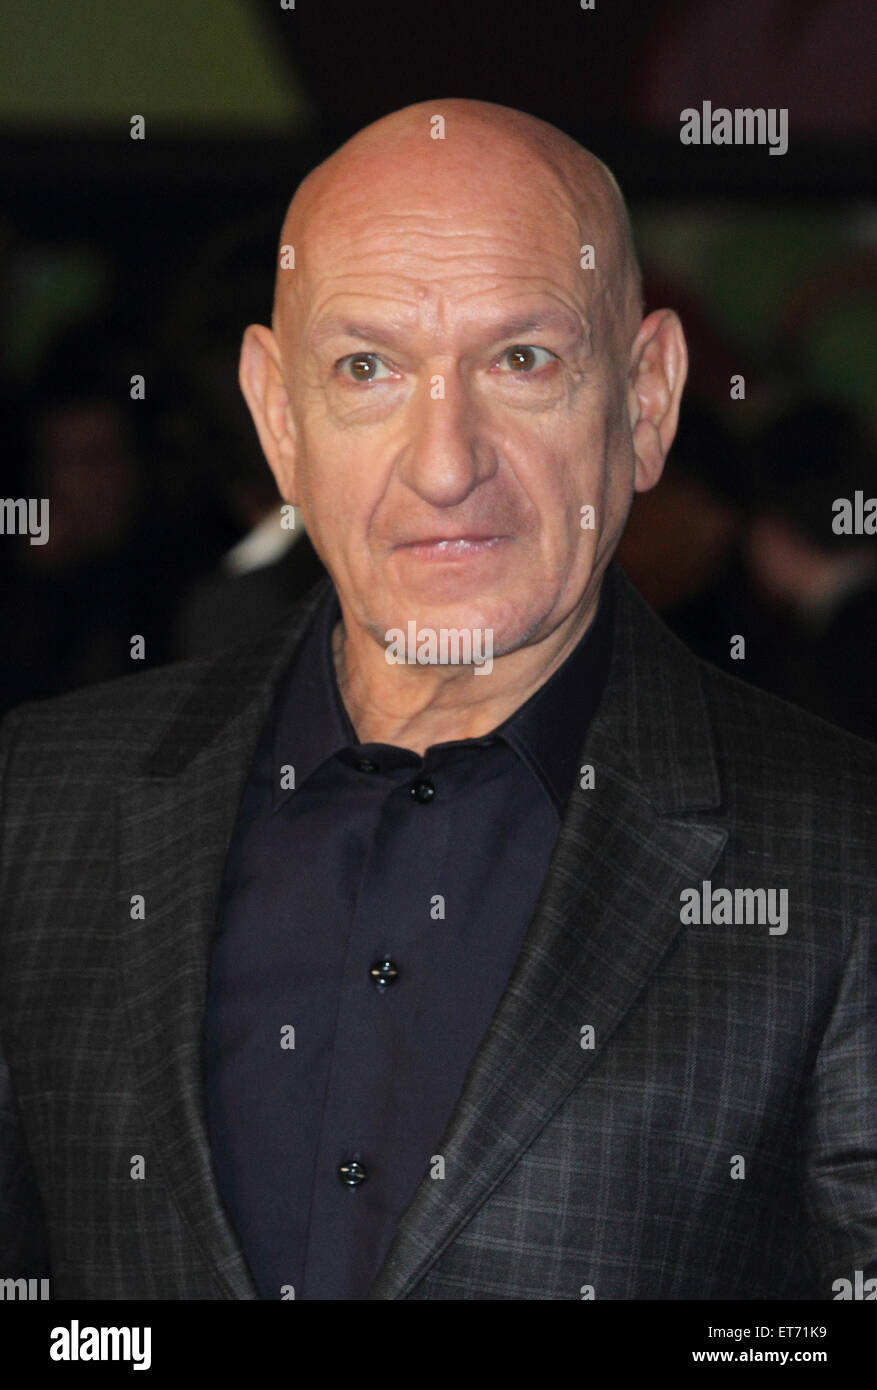 'Night at the Museum: Secret of the Tomb' UK film premiere, Empire Cinema, Leicester Square, London,  Featuring: Sir Ben Kingsley Where: London, United Kingdom When: 15 Dec 2014 Credit: WENN.com Stock Photo